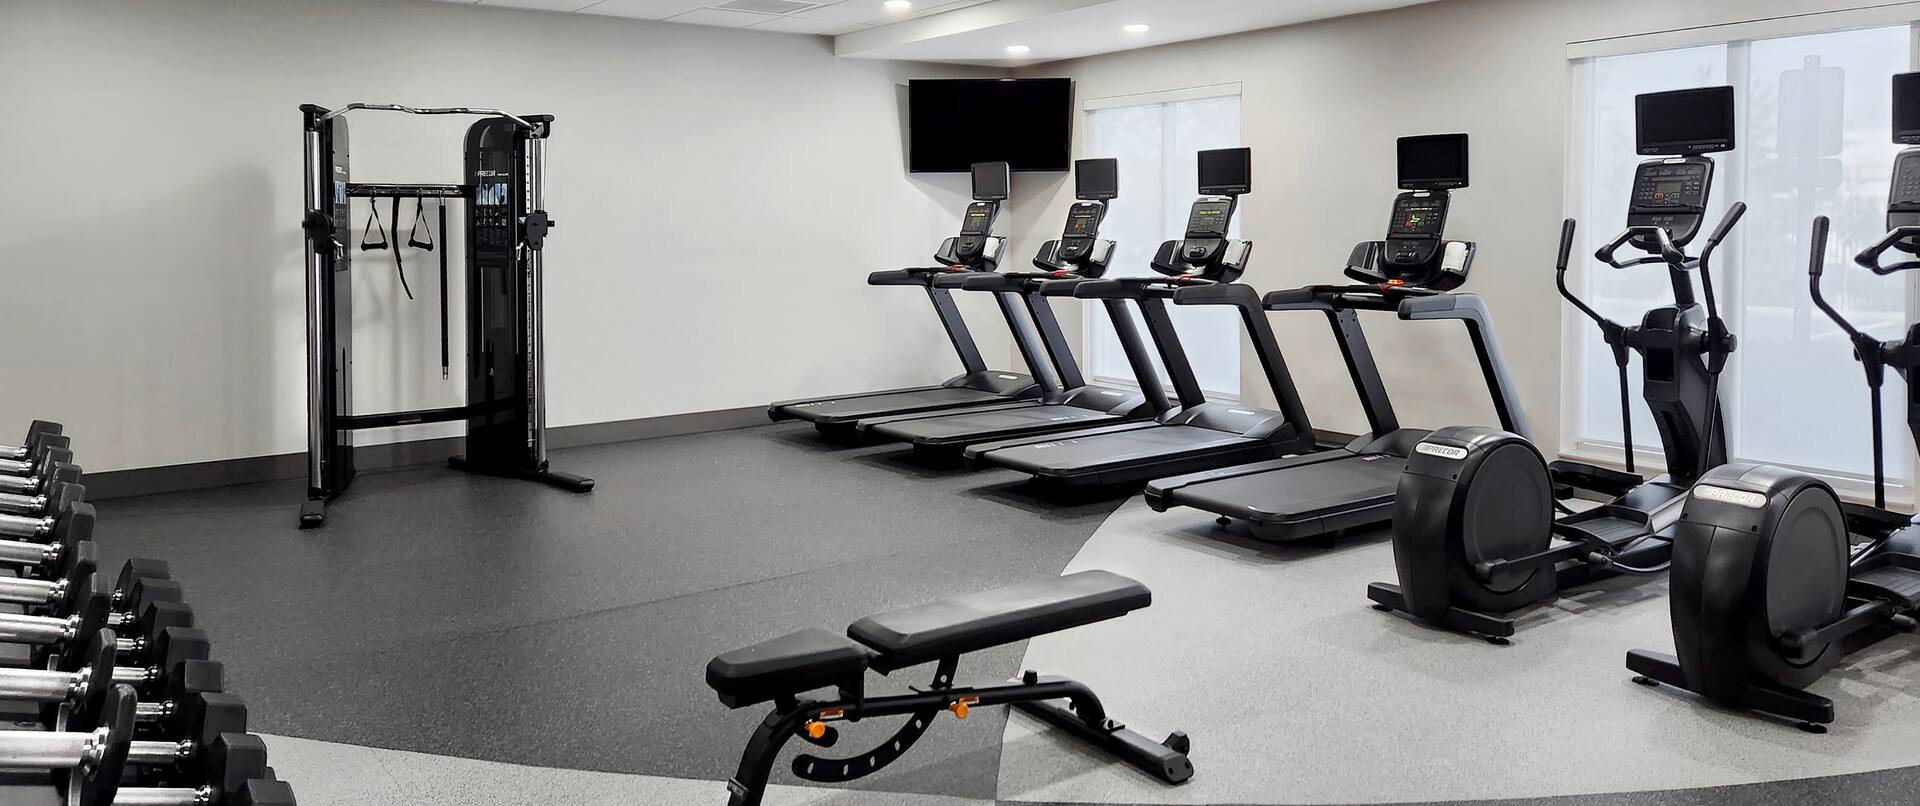 Treadmills and Weights in Fitness Center